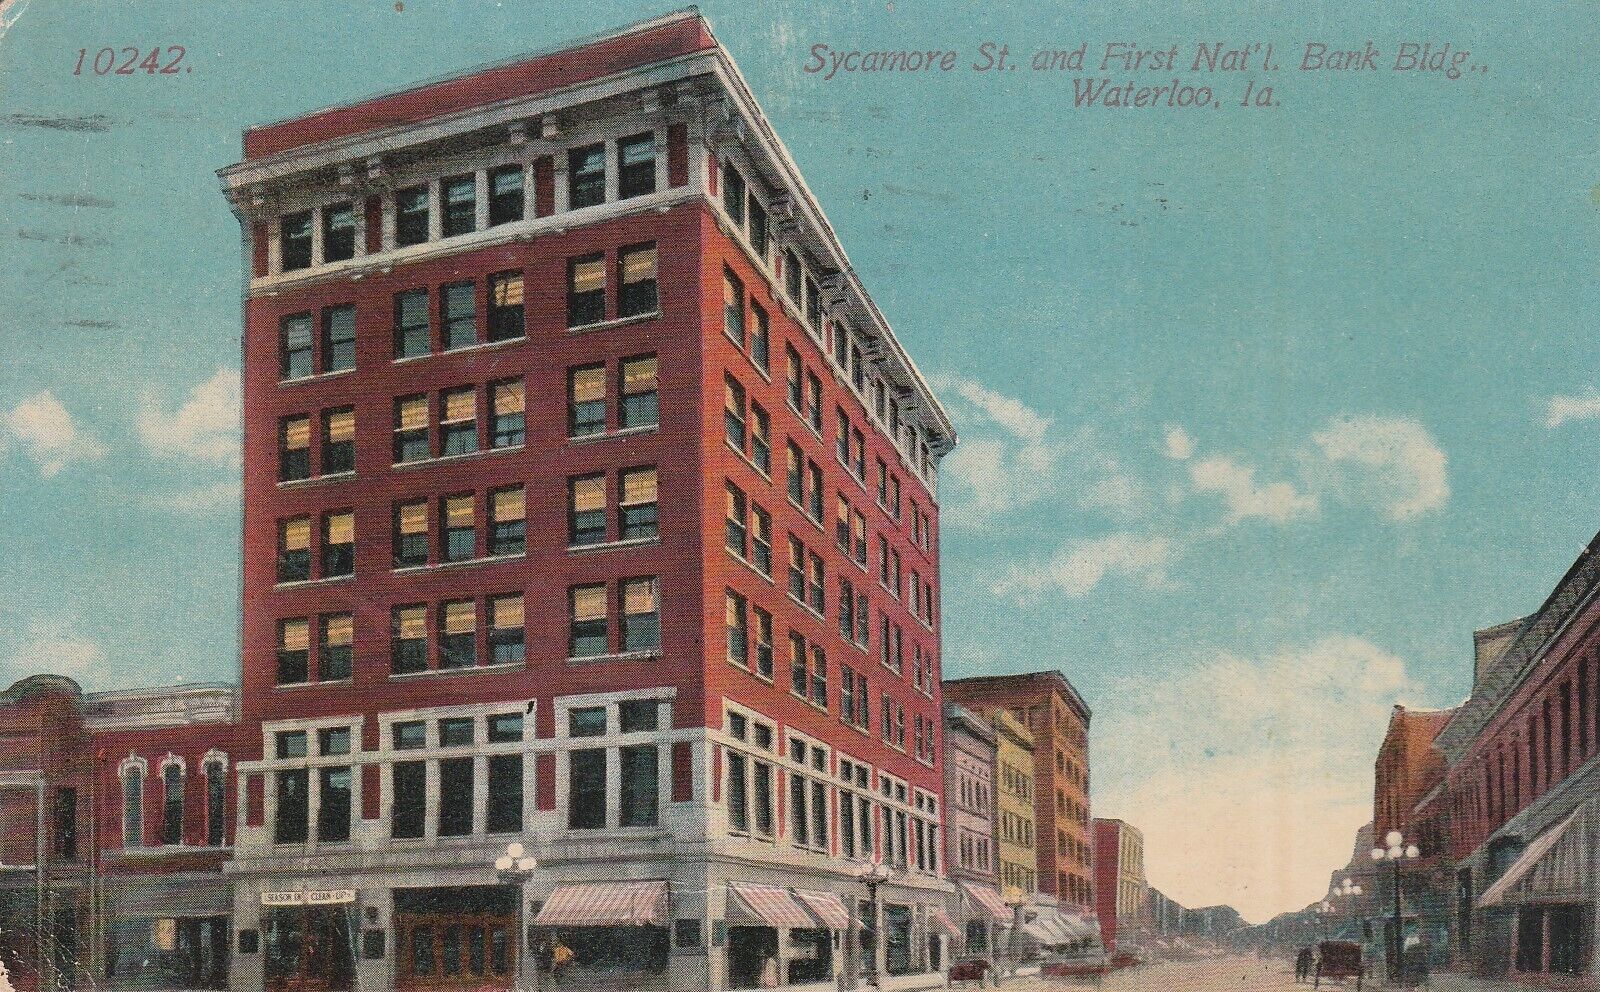 Waterloo, Ia., Sycamore St and First National Bank Building Iowa Postcard